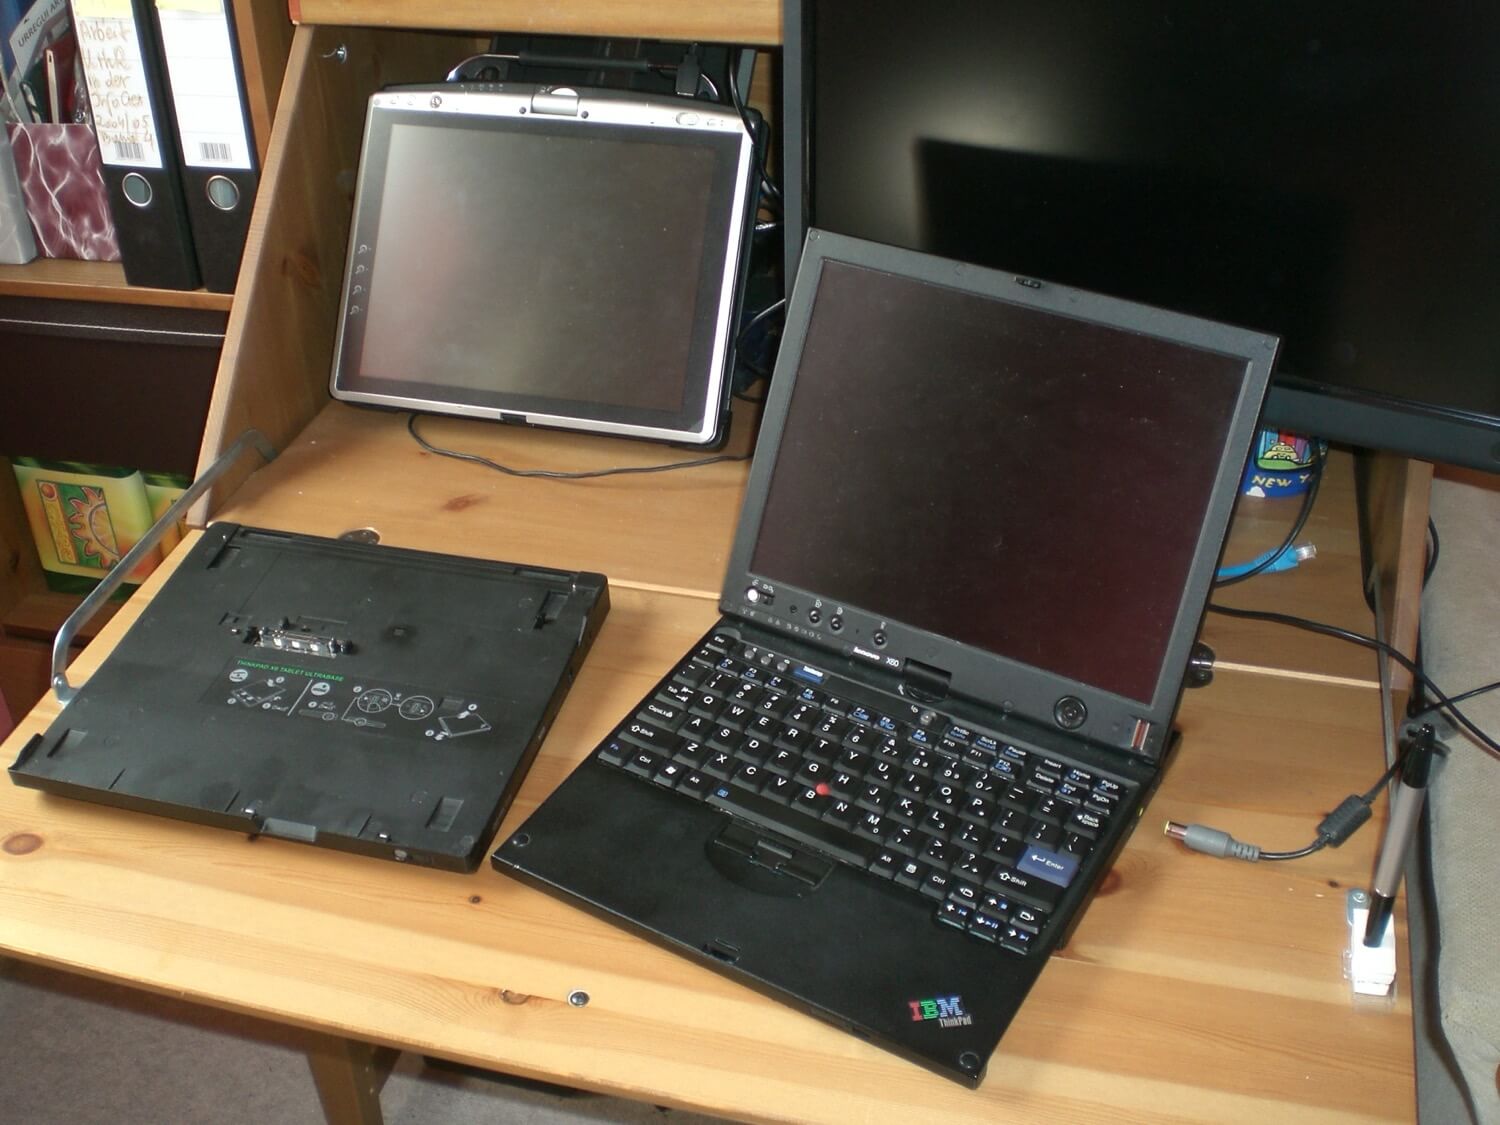 History of my 10 laptops - from 2000 and Compaq, Fujitsu, Toshiba, ThinkPad through 2008 with Apple MacBooks until now! thinkpad